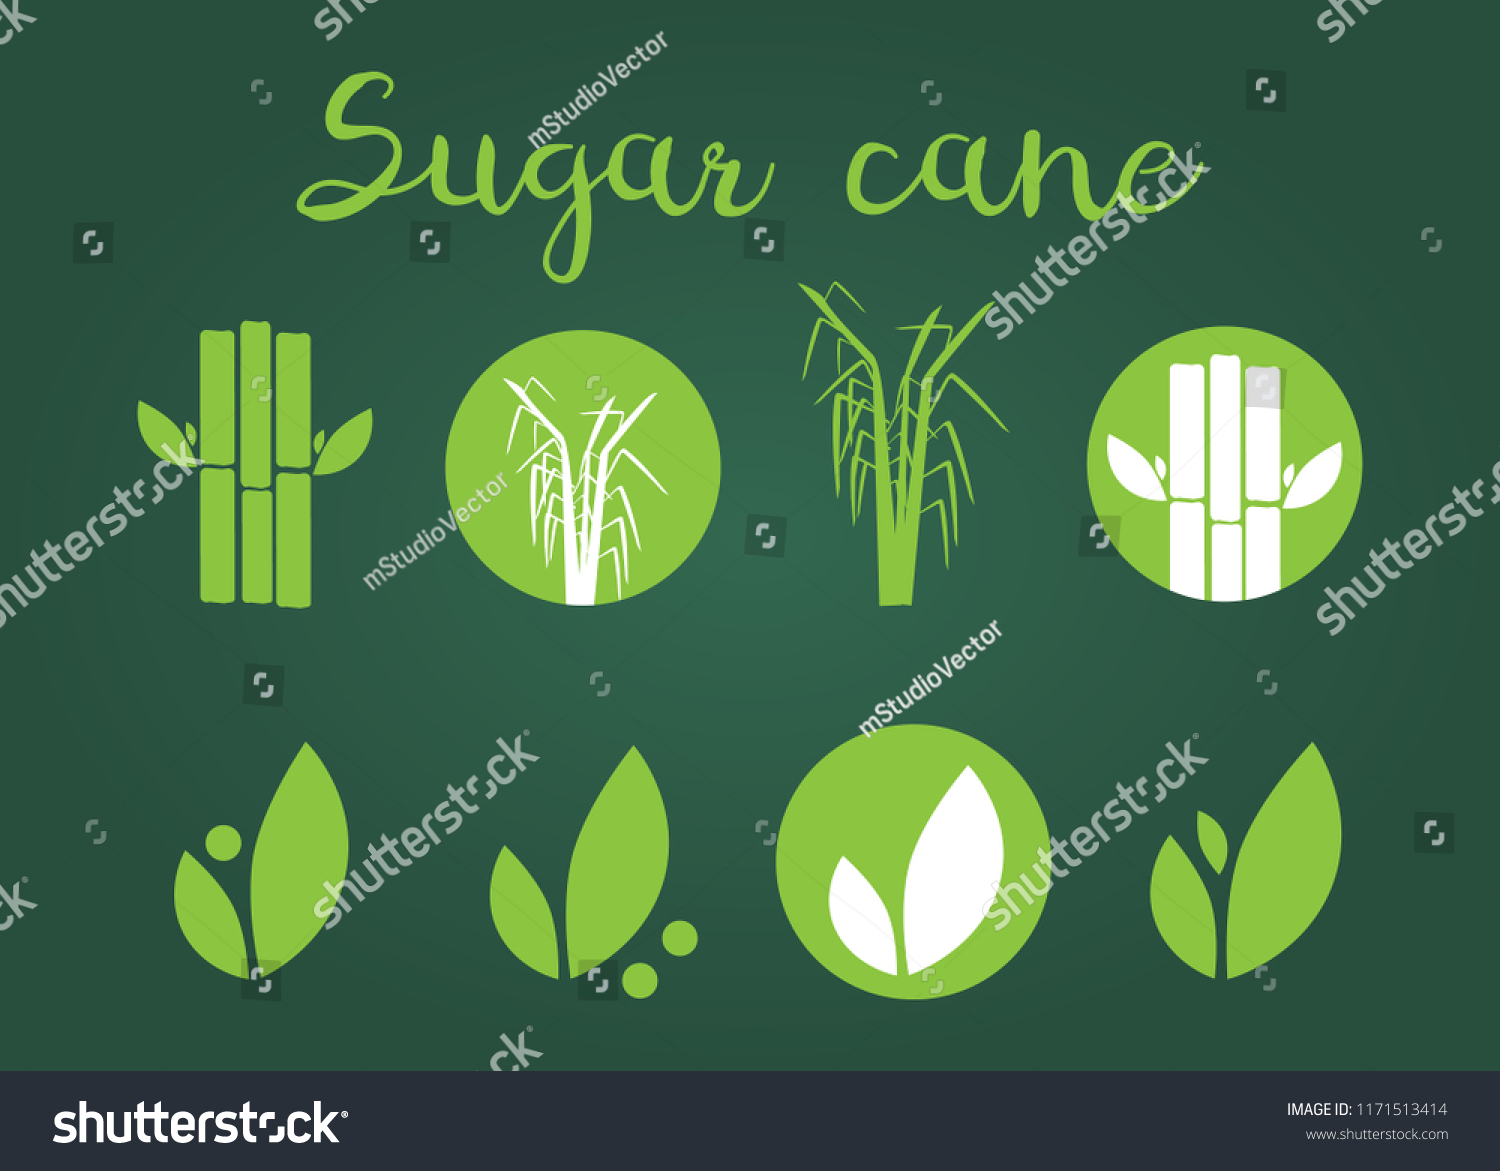 Sugar Cane Silhouettes Icons Sugar Cane Stock Vector Royalty Free 1171513414 Shutterstock 